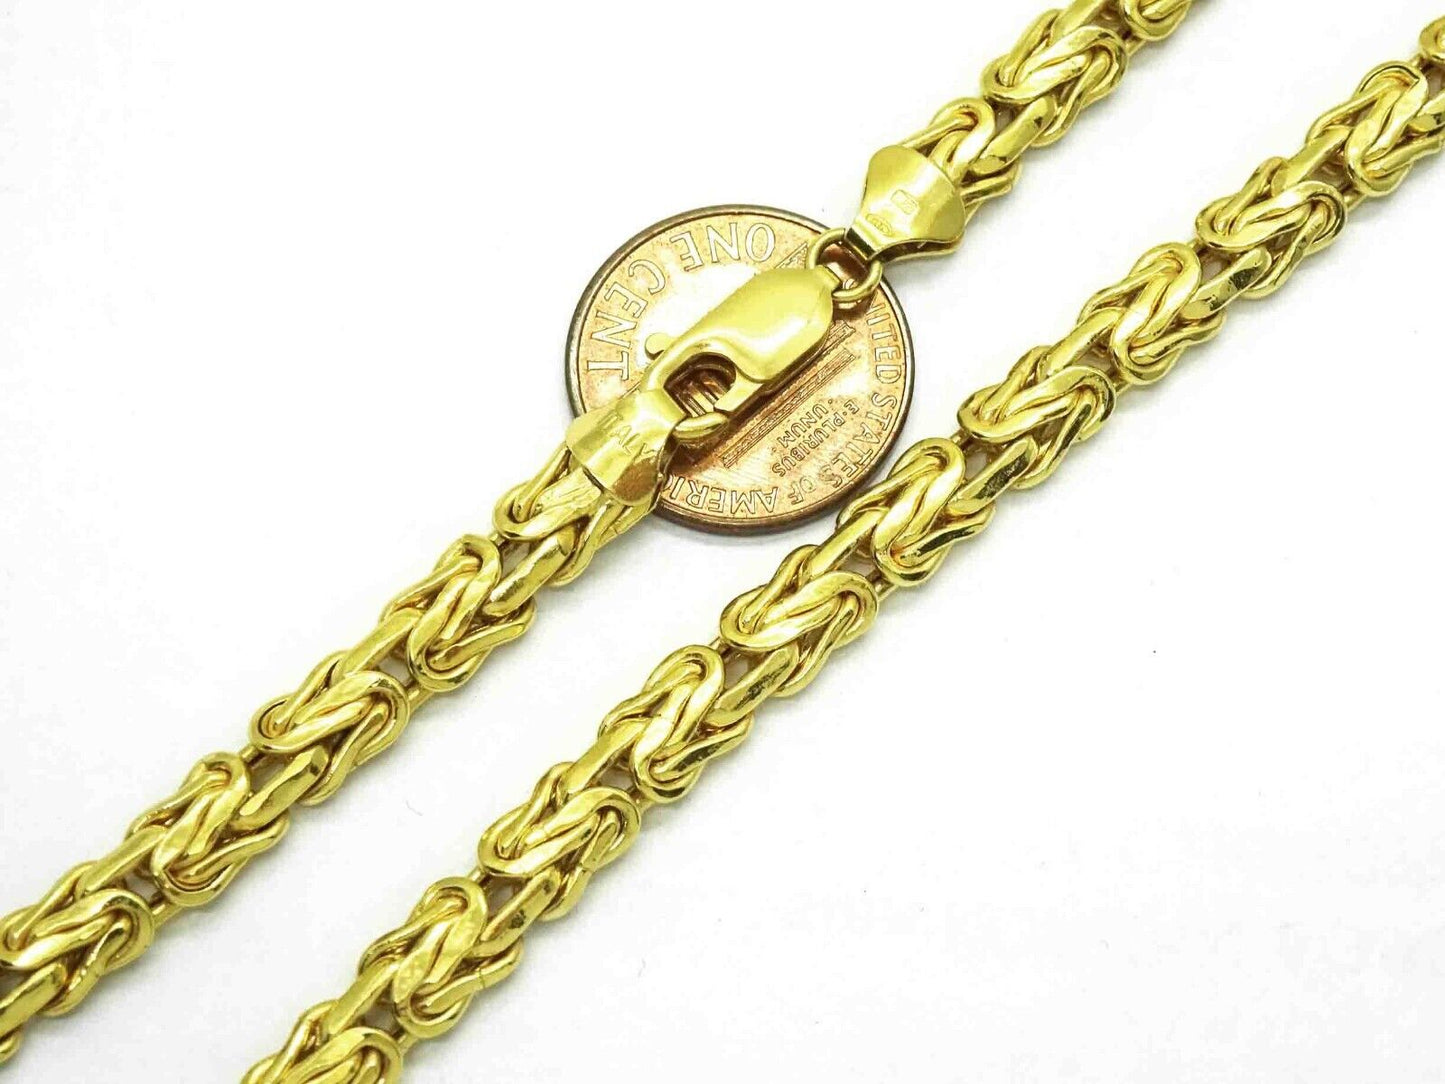 6mm Wide Italian Byzantine Chain Necklace 14k Gold 16.5" Long 20.2 Grams